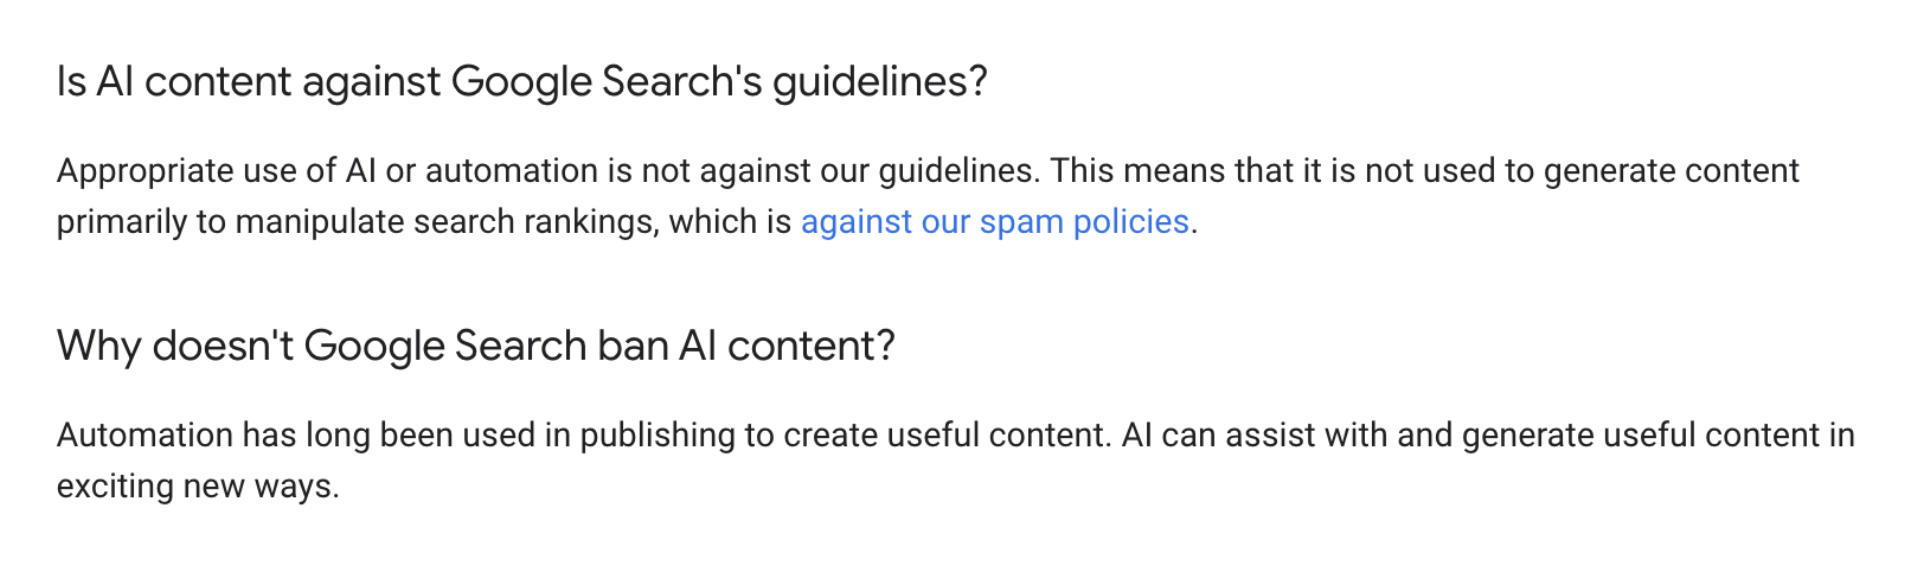 Googles AI guidelines